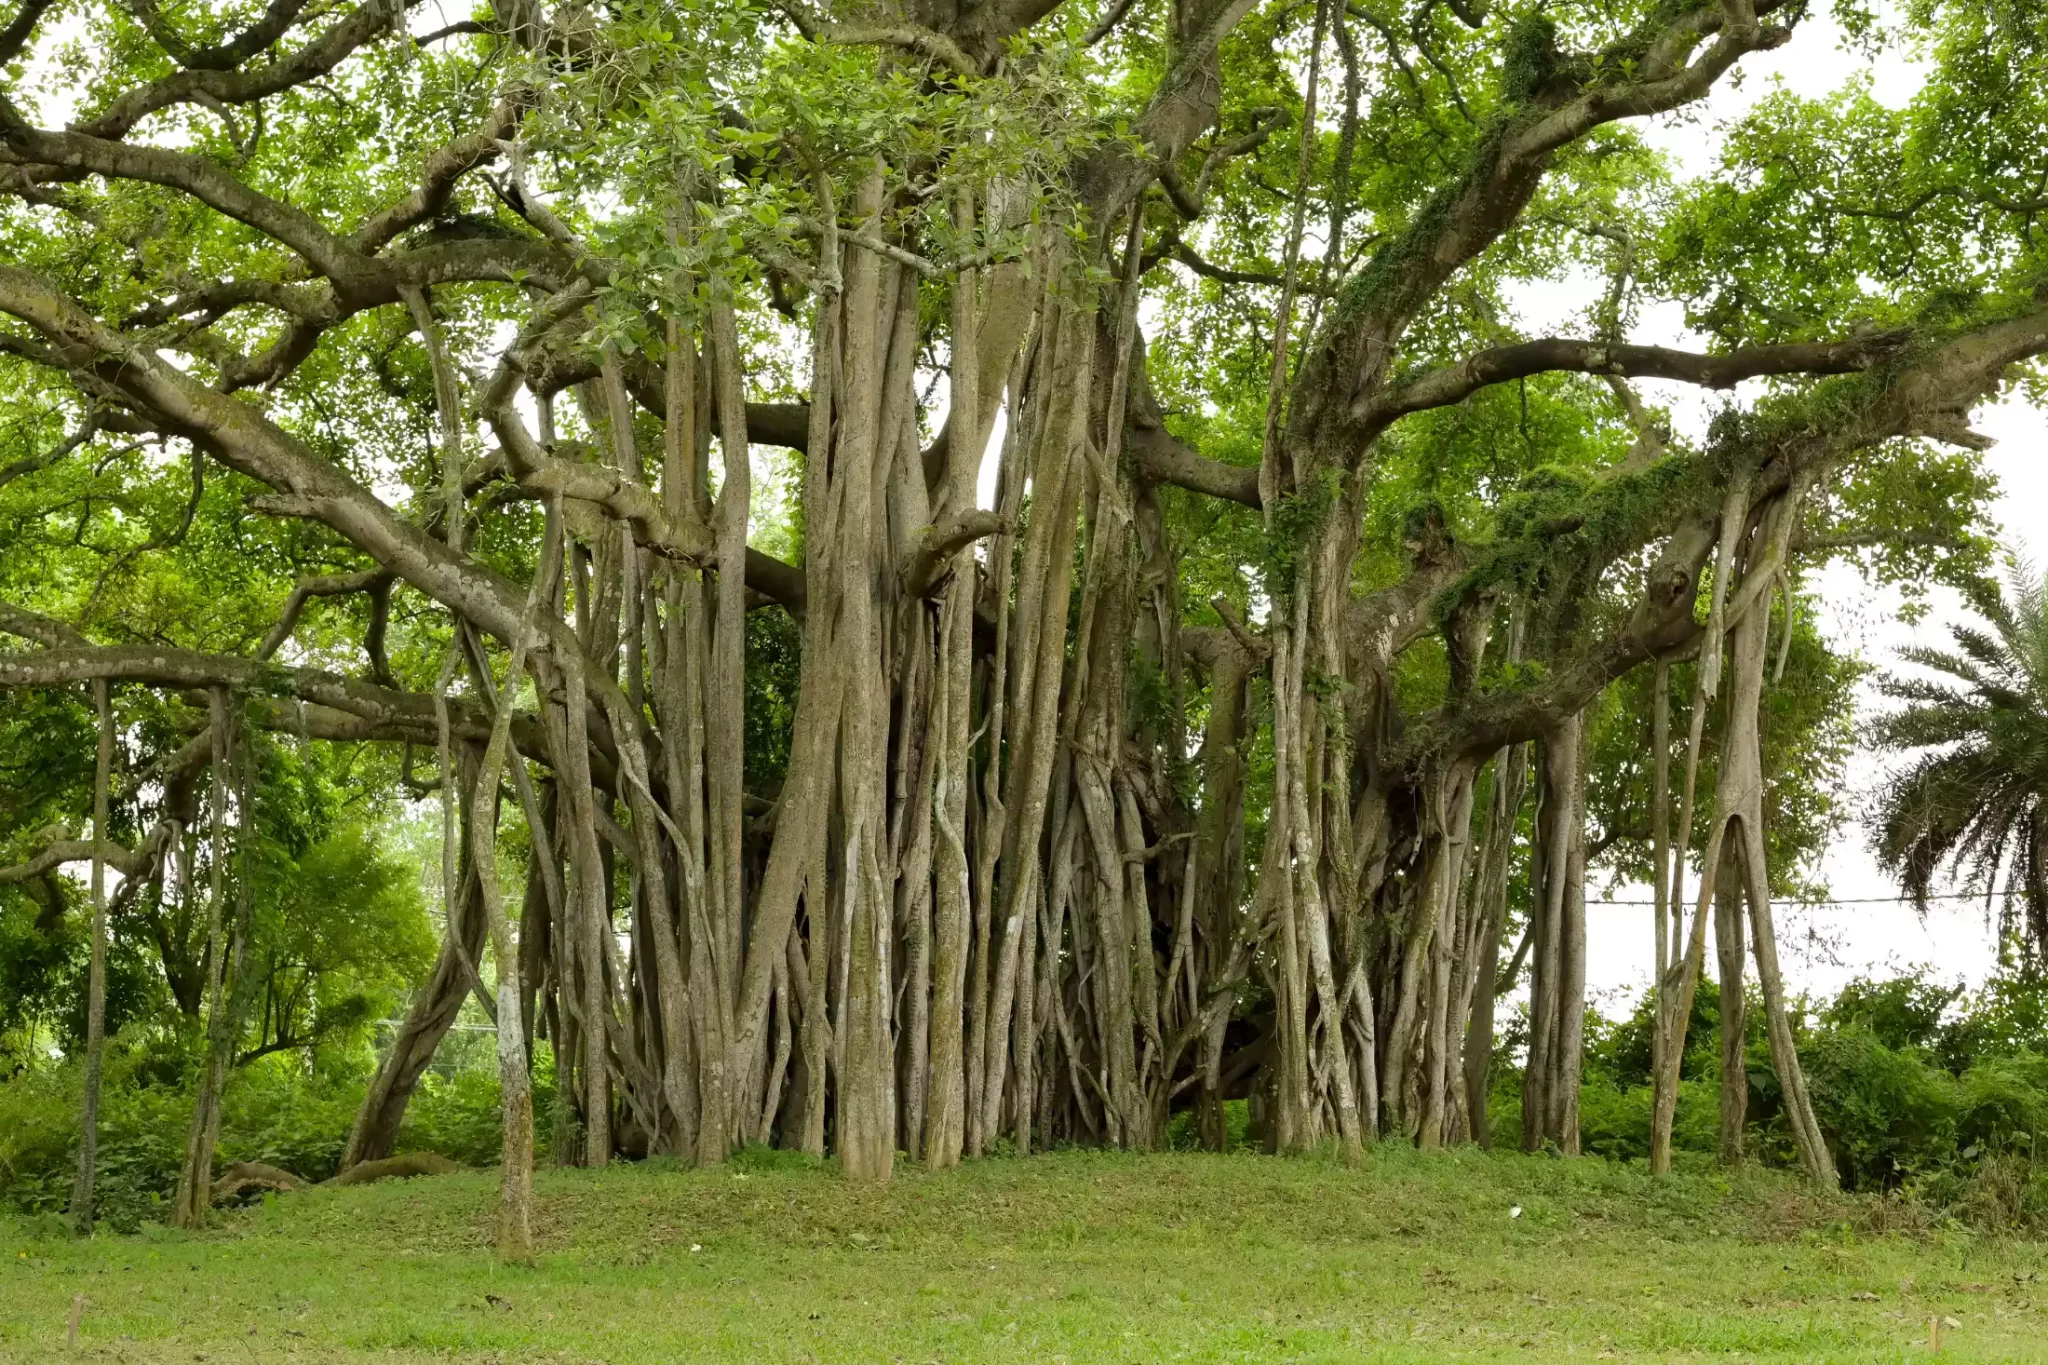 Banyan tree with its anchoring roots and green foliage.